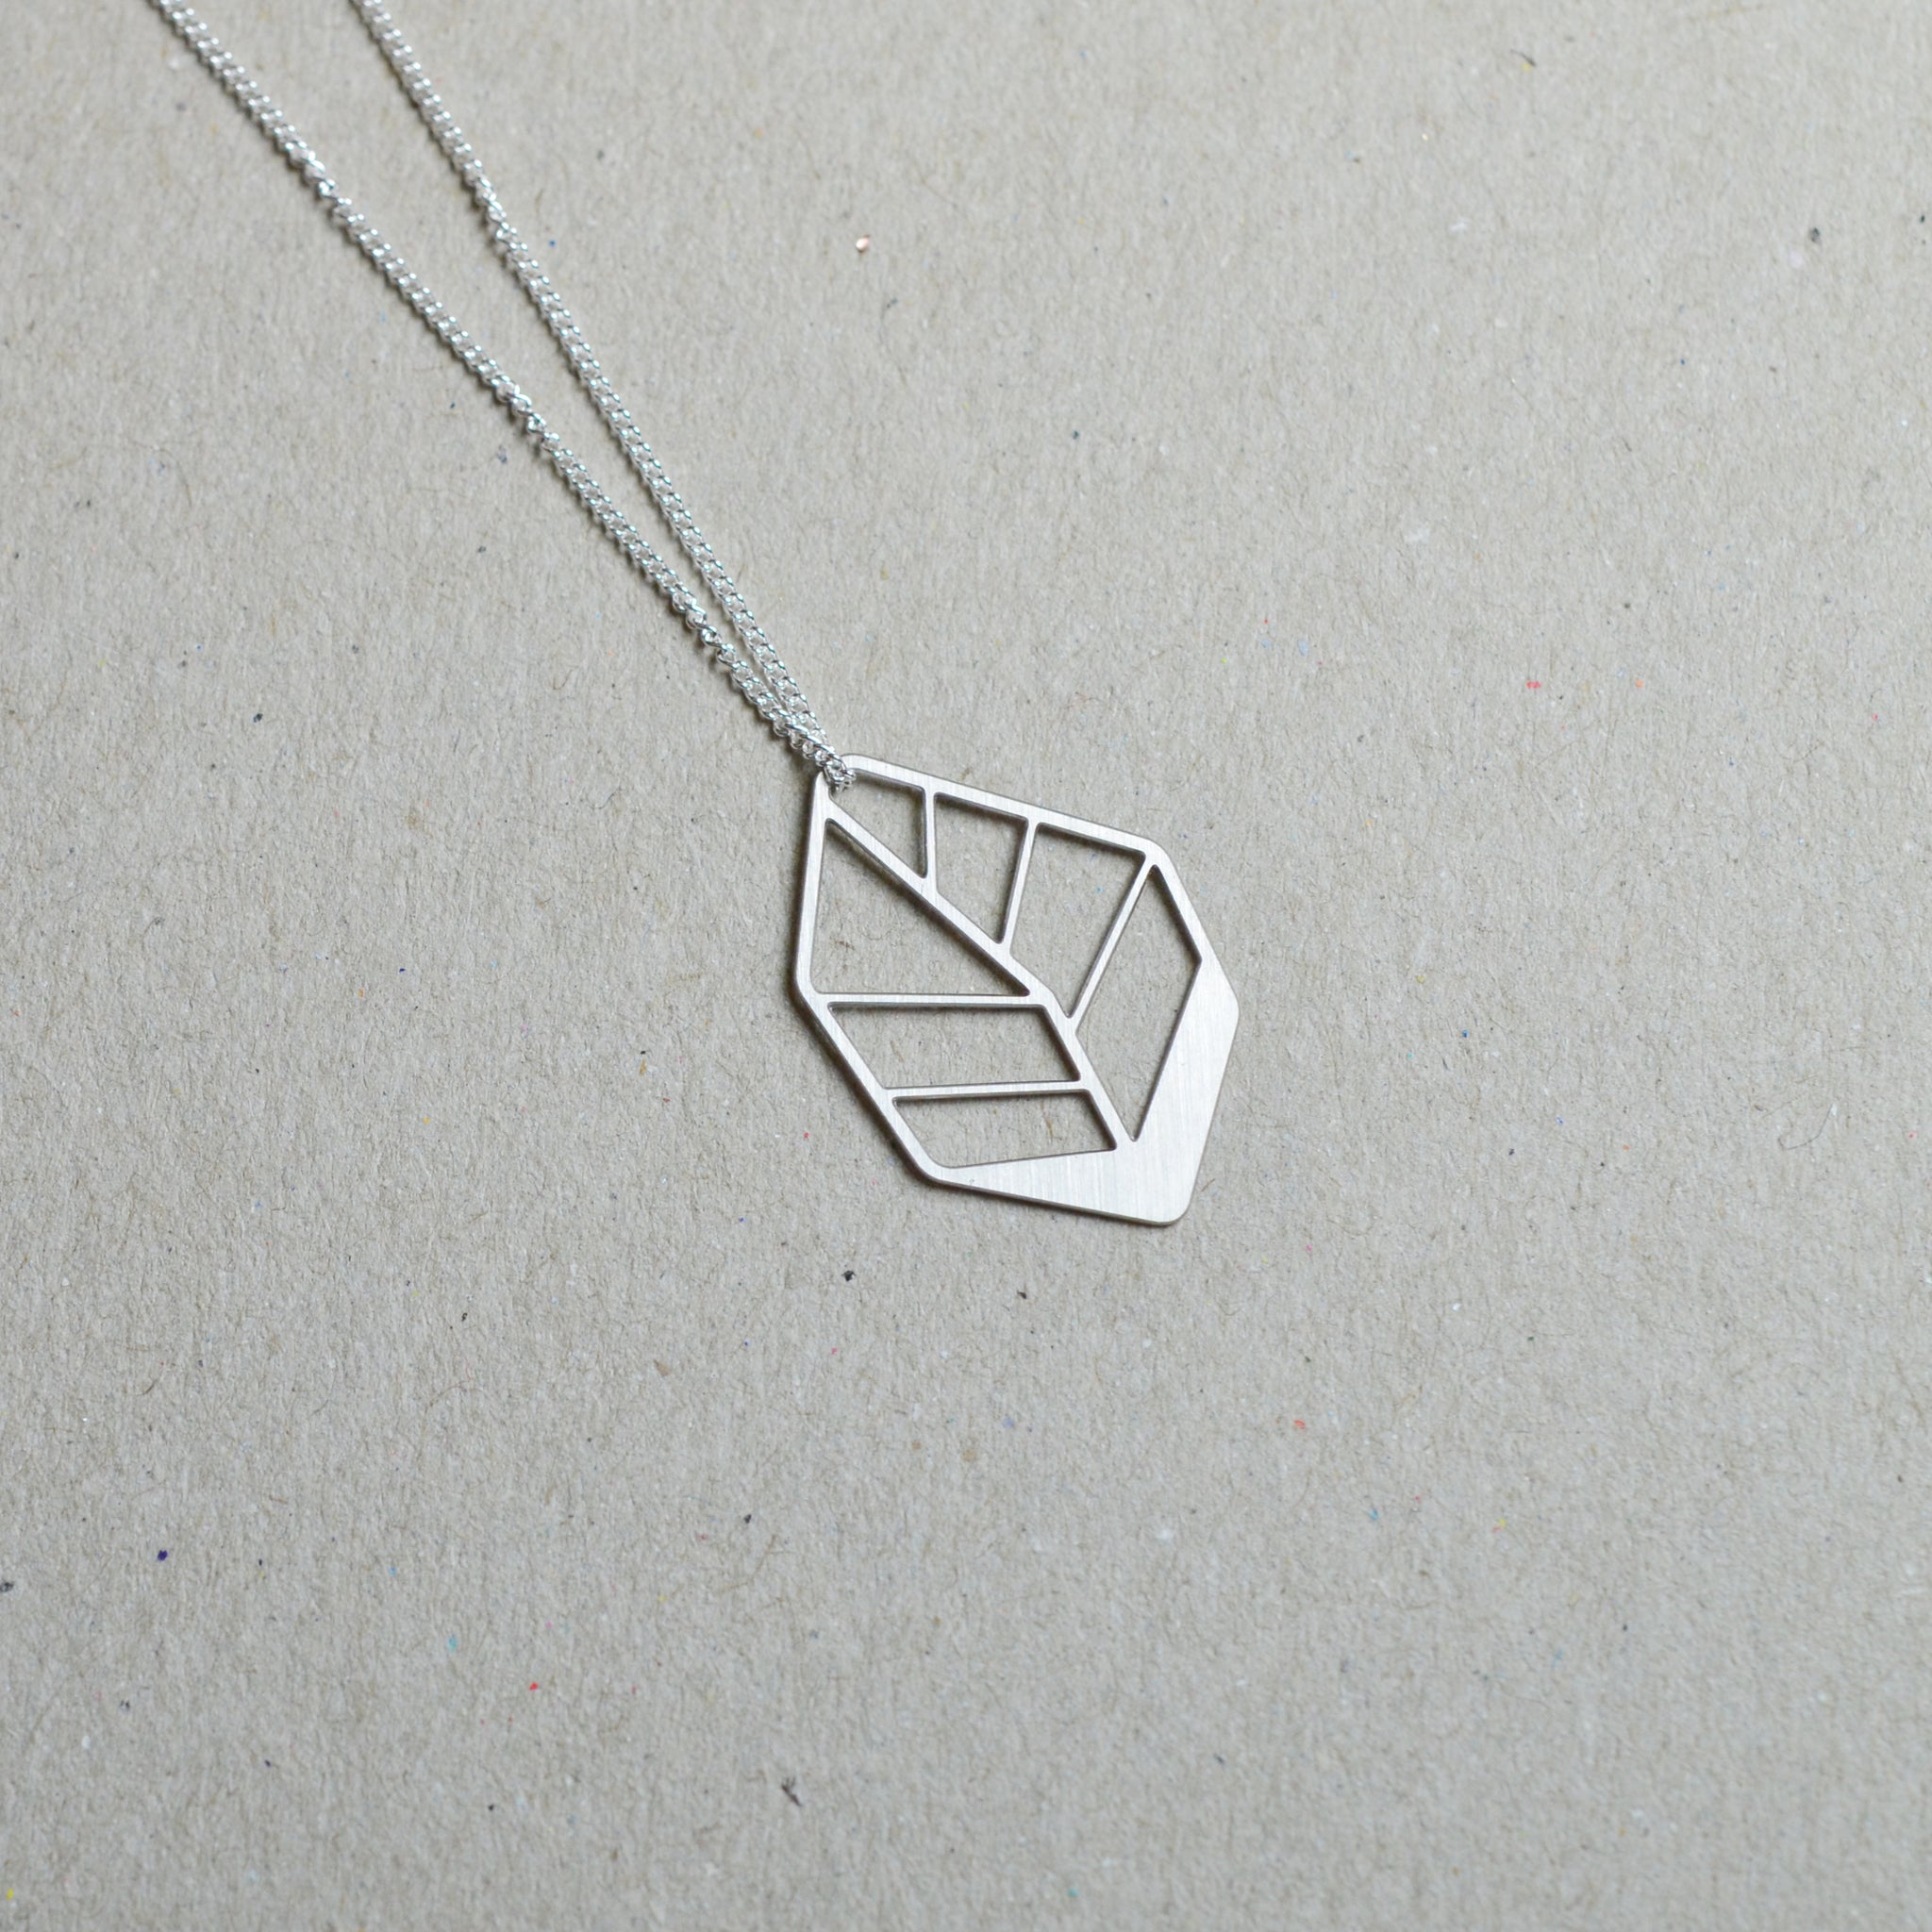 Hoja: Small abstract leaf necklace